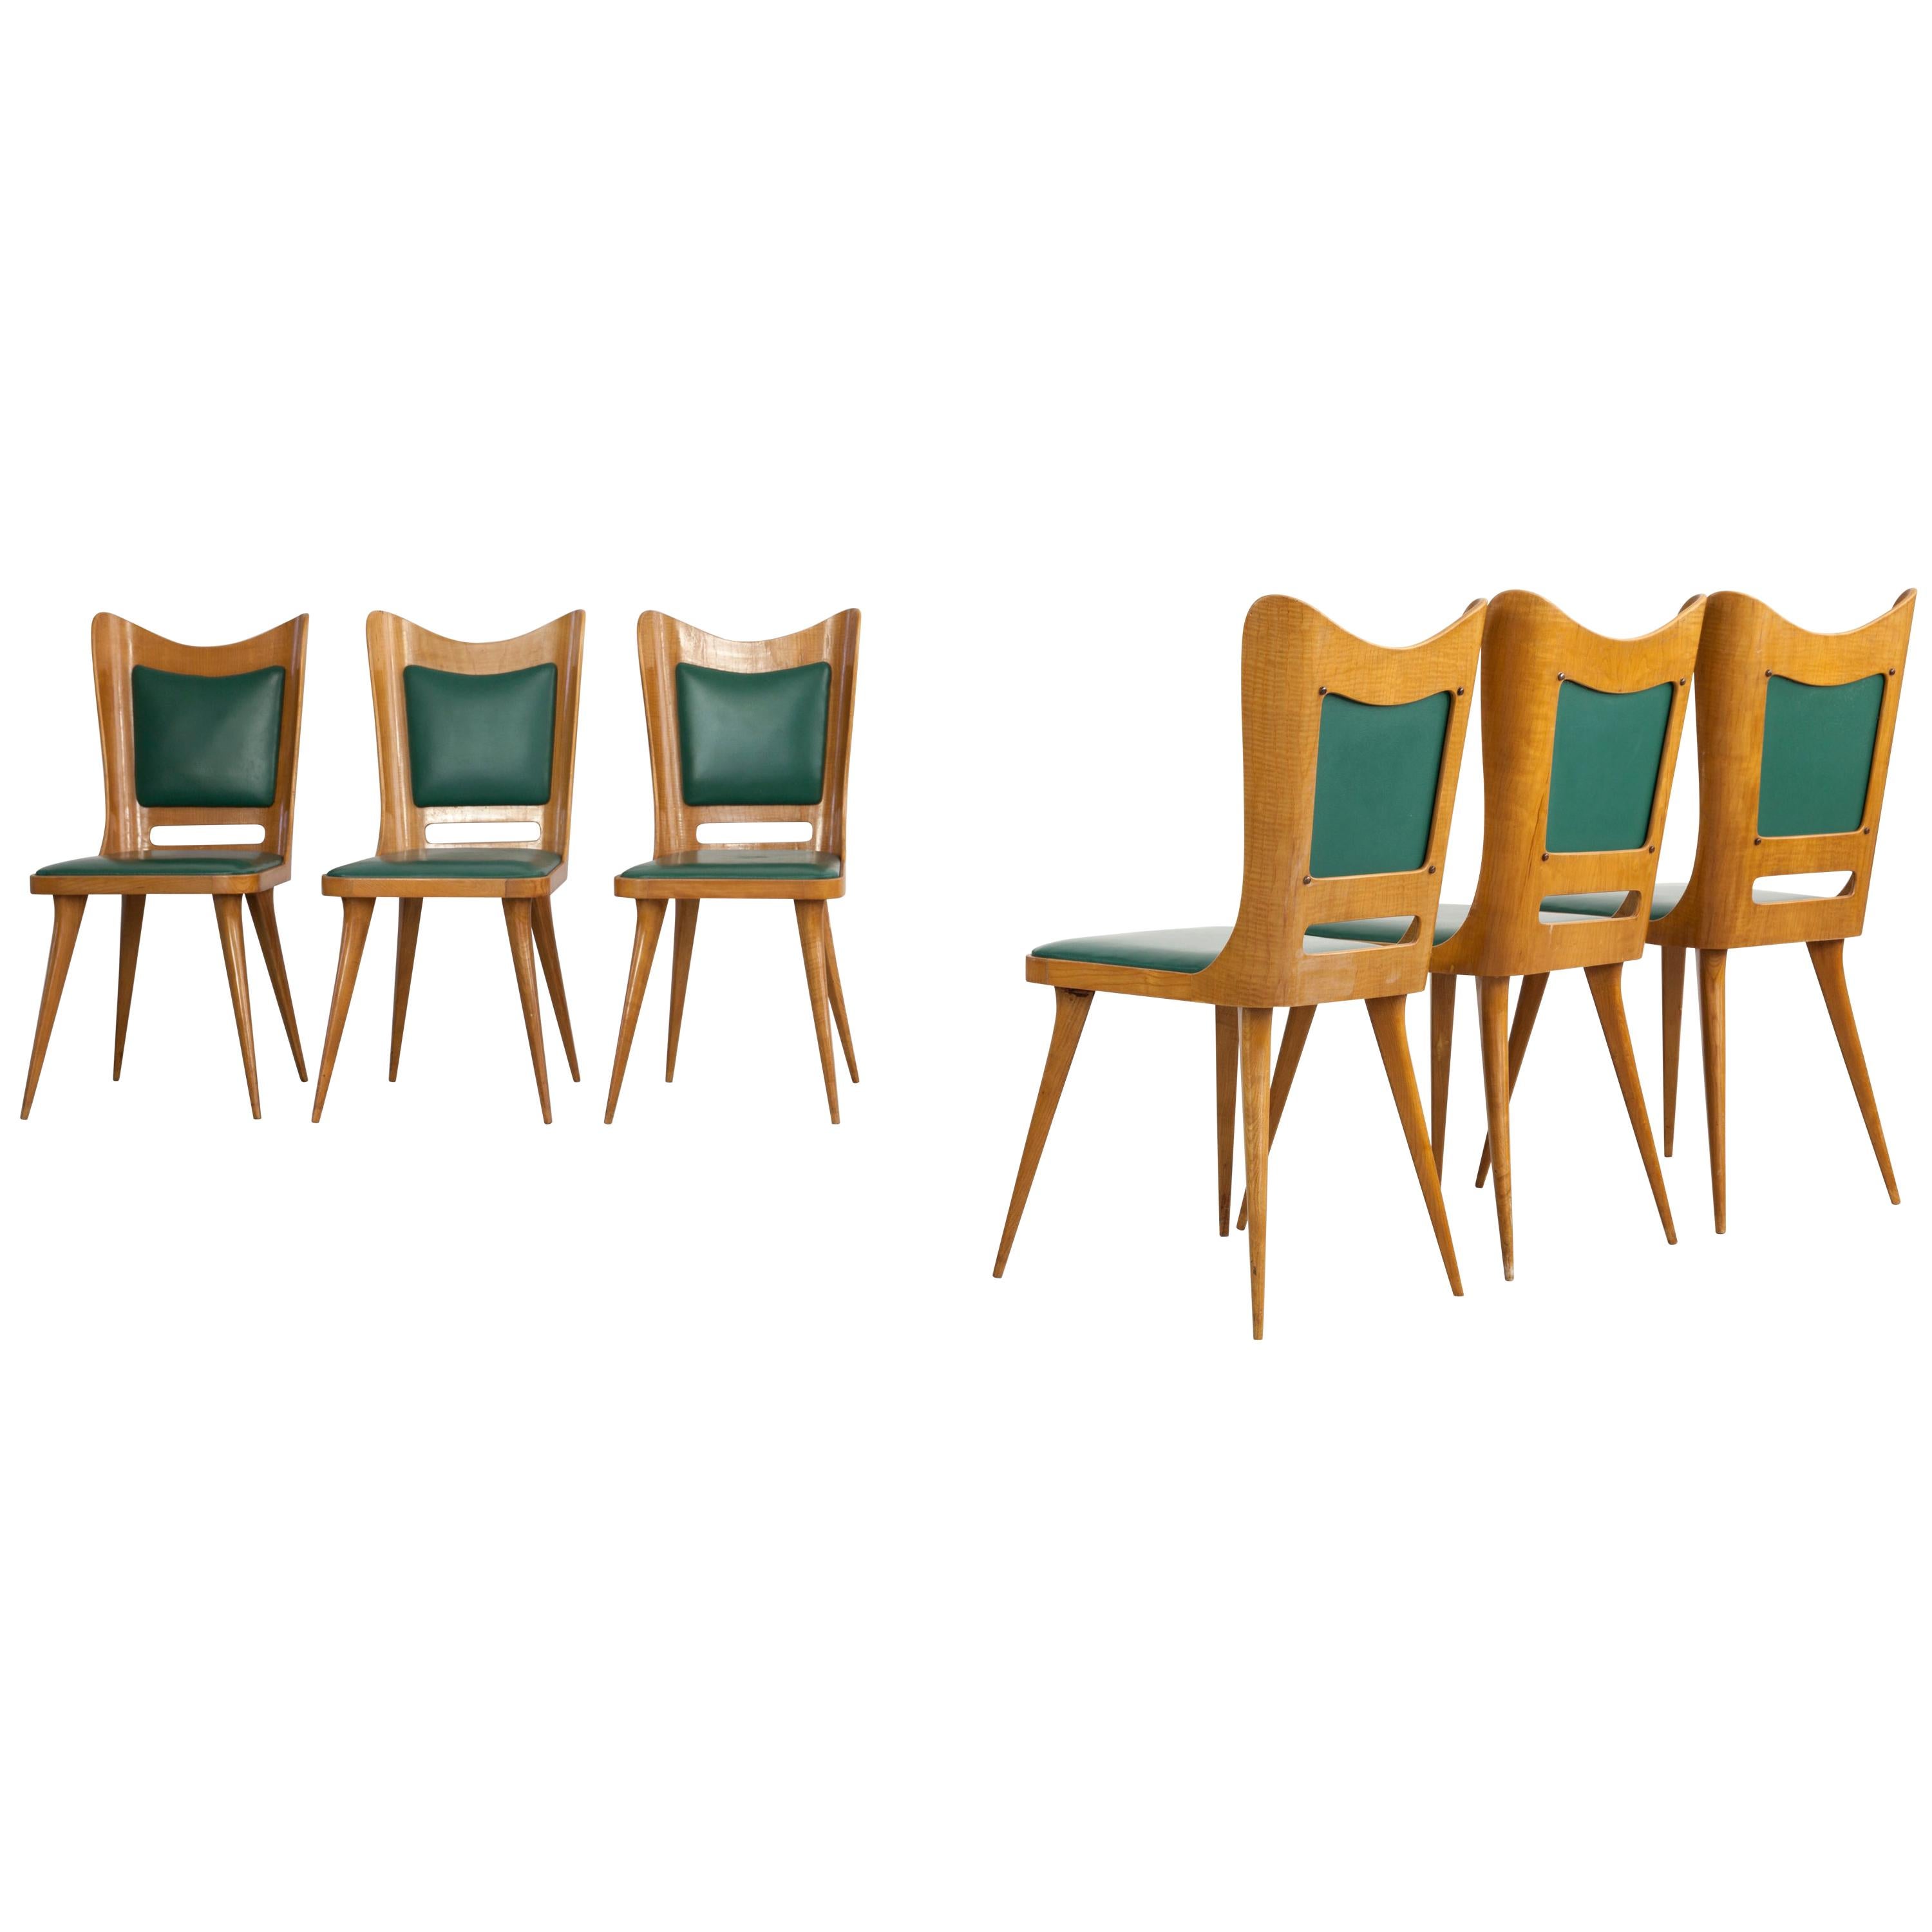 Set of Six Italian Wooden Dining Chairs with Green Upholstery, 1950